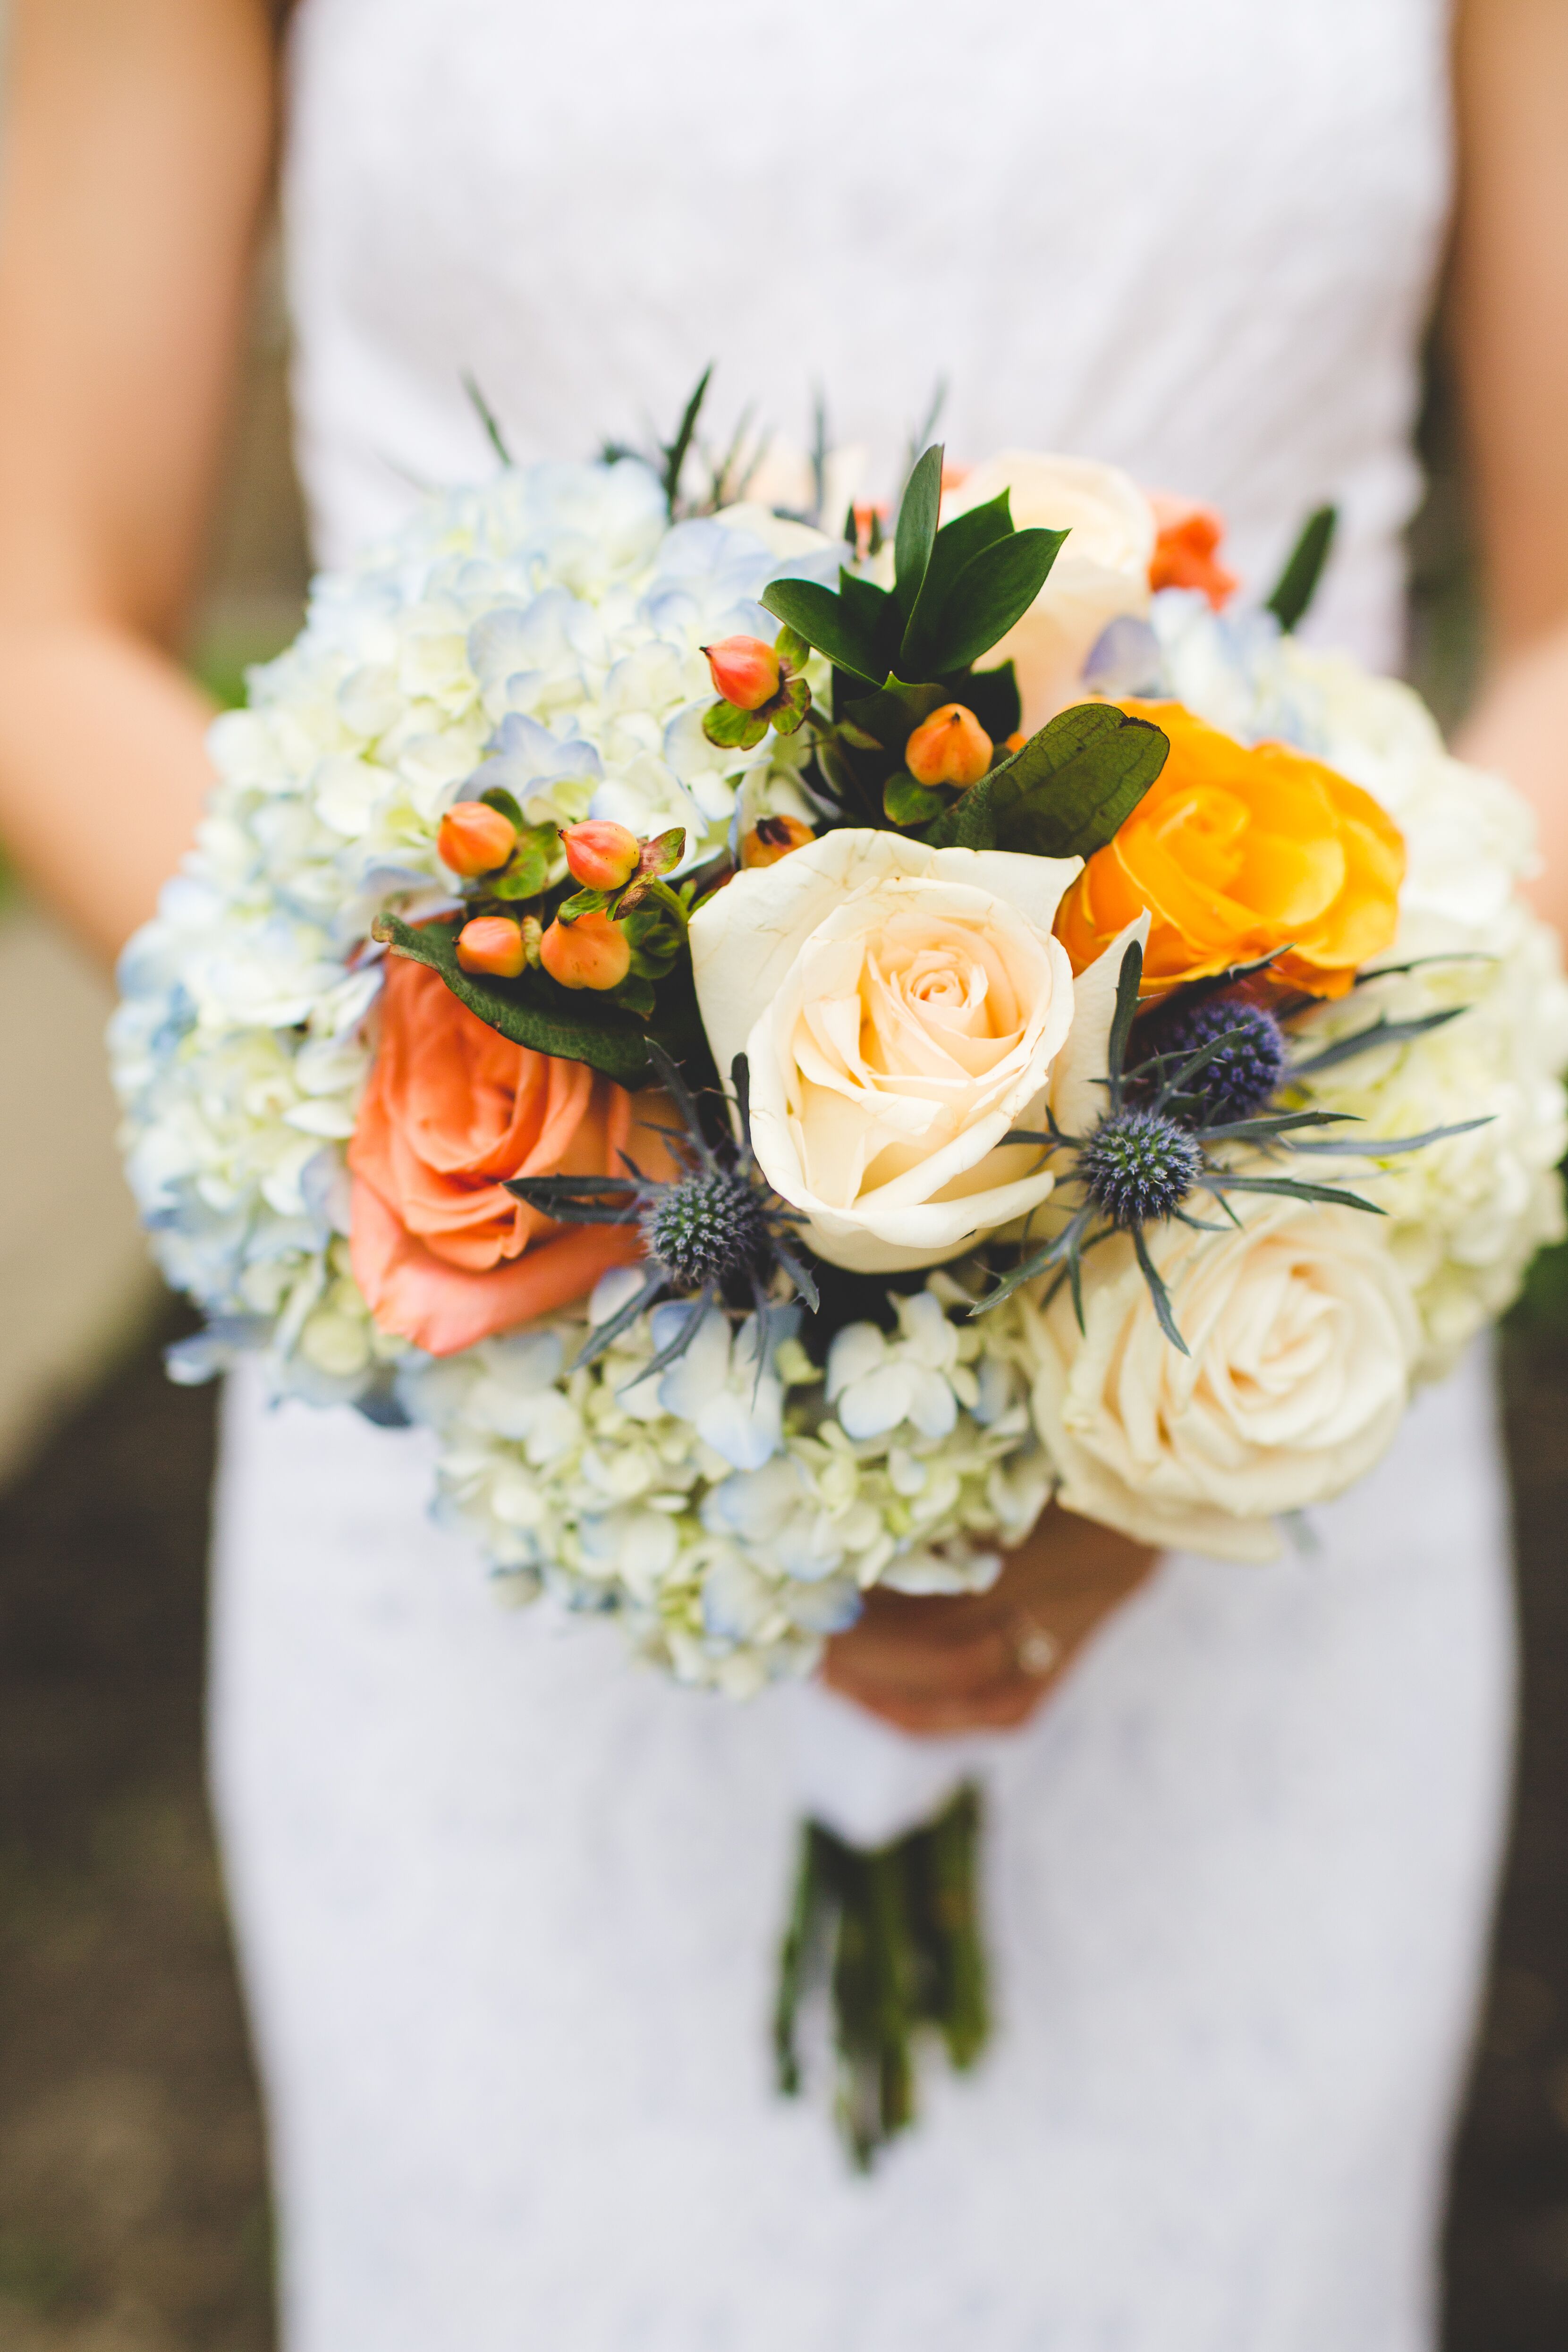 Summer Bouquet With Hydrangeas and Garden Roses